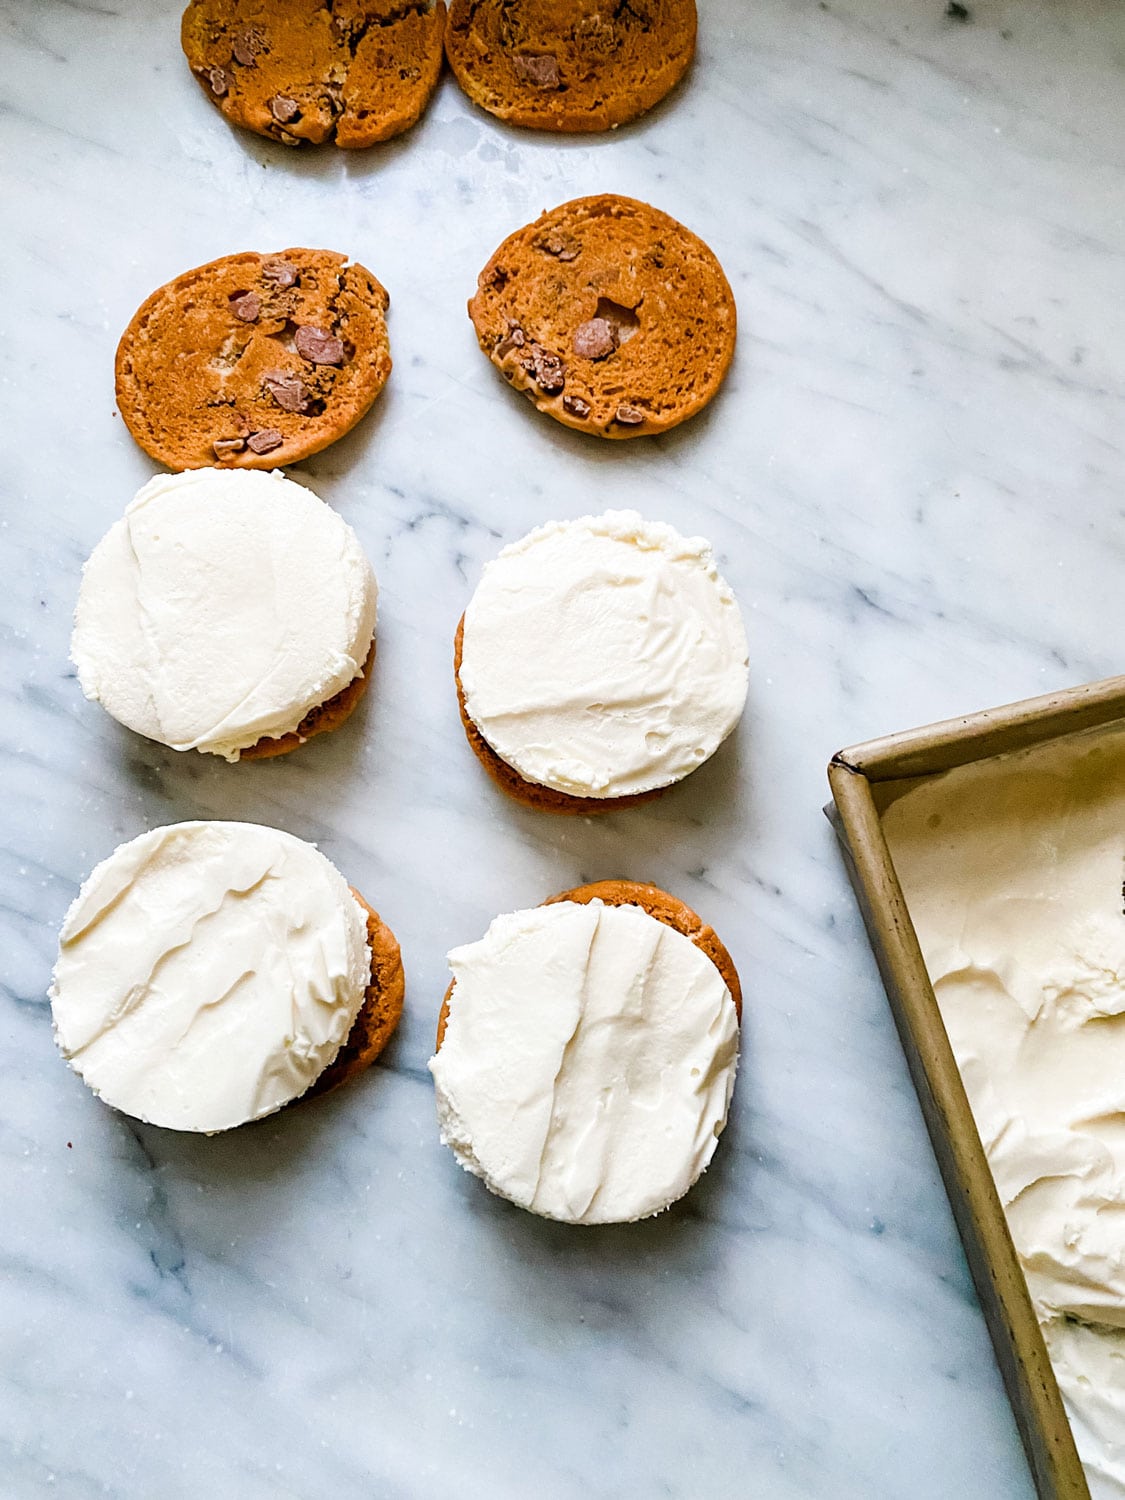 Craving an ice cream sandwich? You can now make one at home